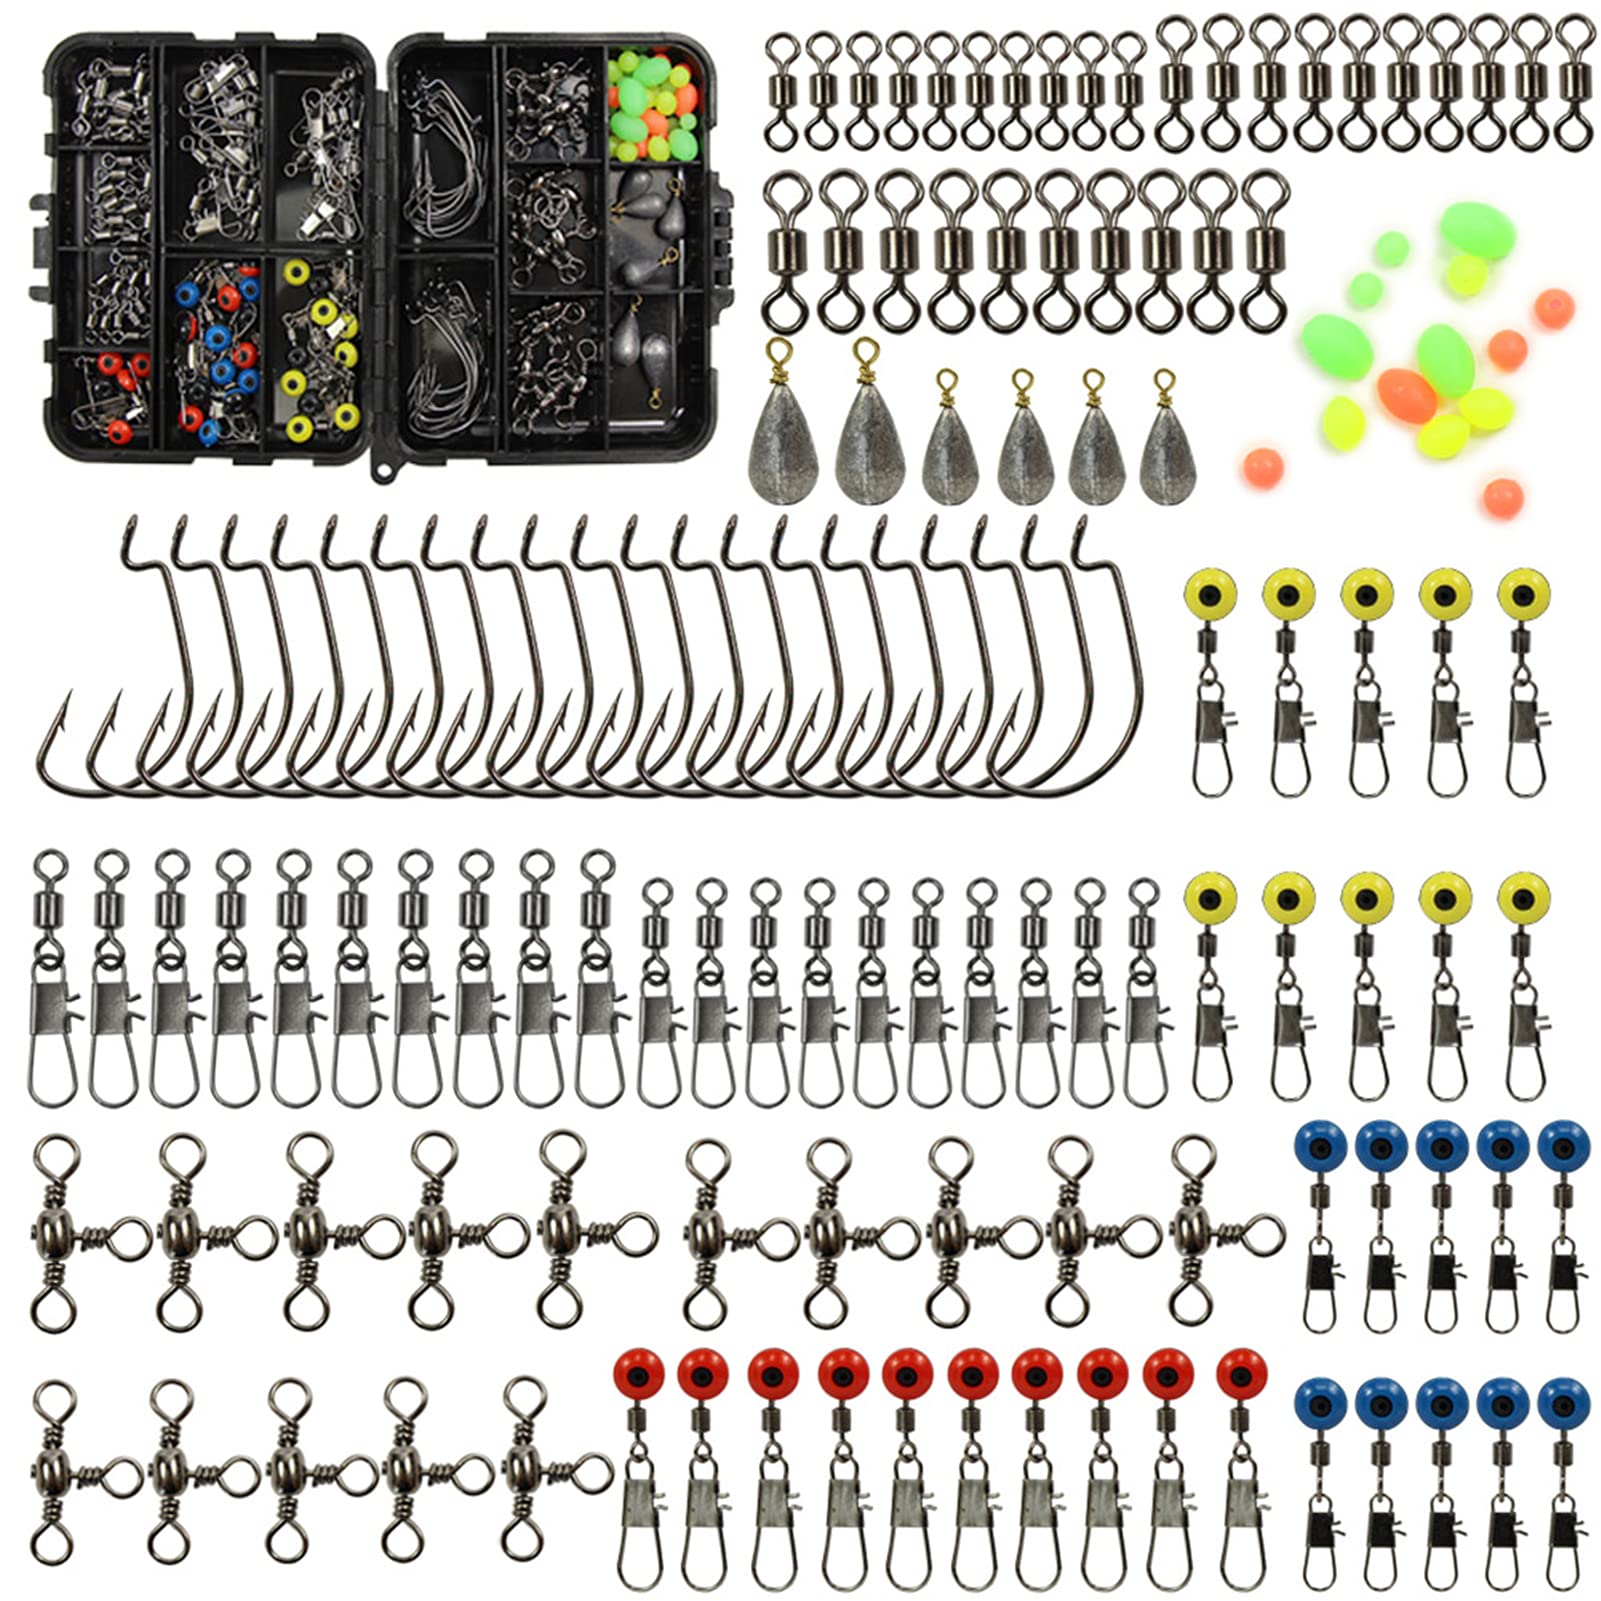 160pcs/box Fishing Accessories kit with Tackle Box,Including Fishing  Swivels Snaps, Bass Casting Sinker Weights